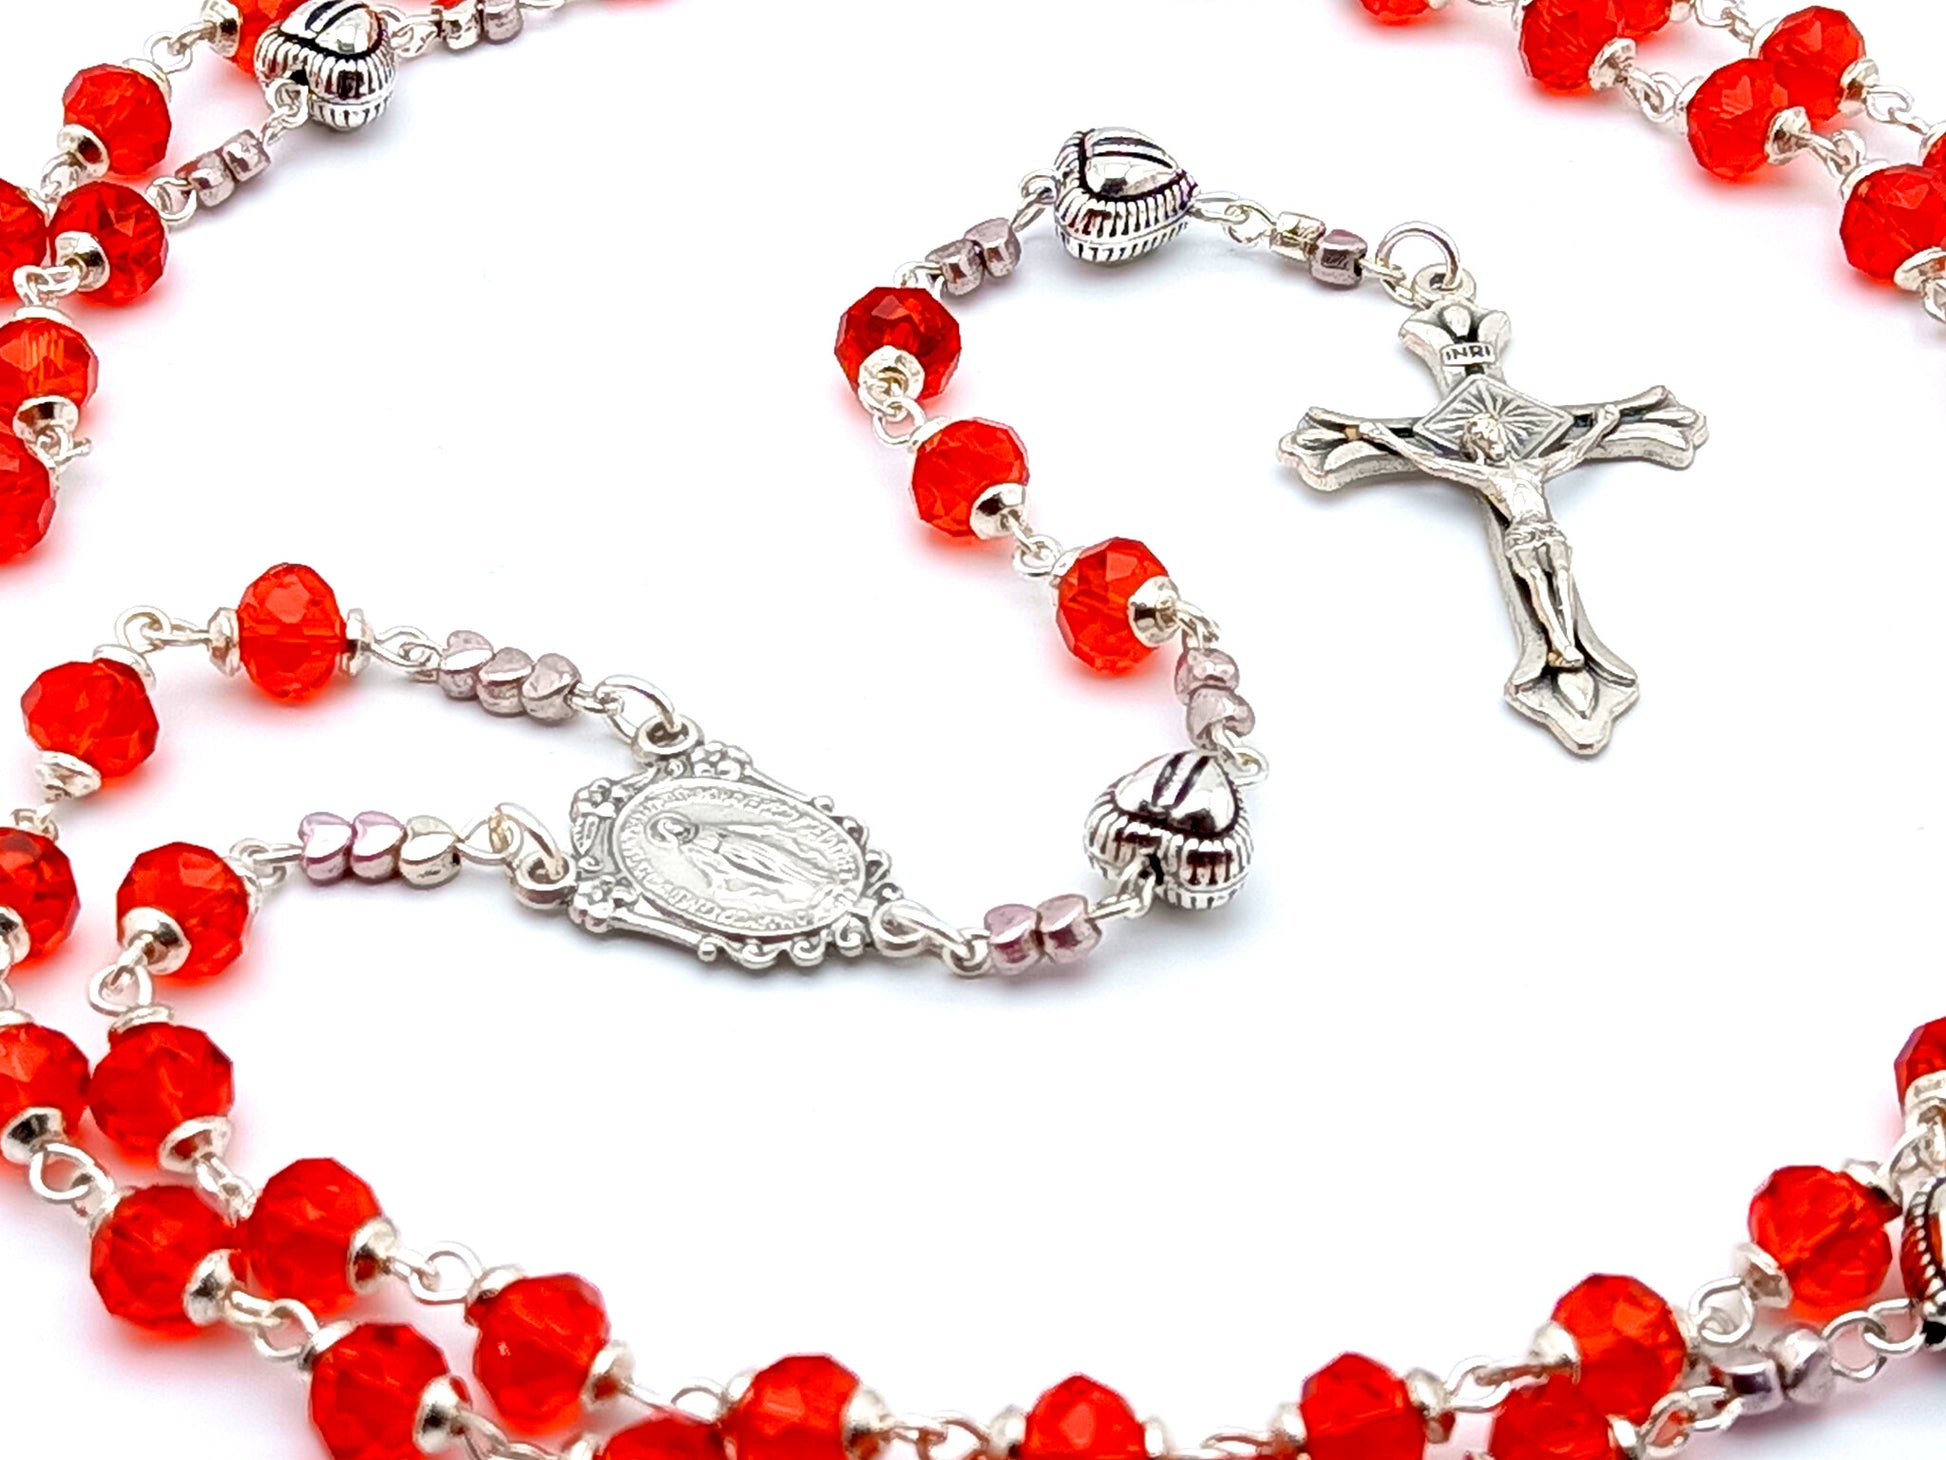 Miraculous medal unique rosary beads with red faceted glass and silver beads, silver crucifix and centre medal.